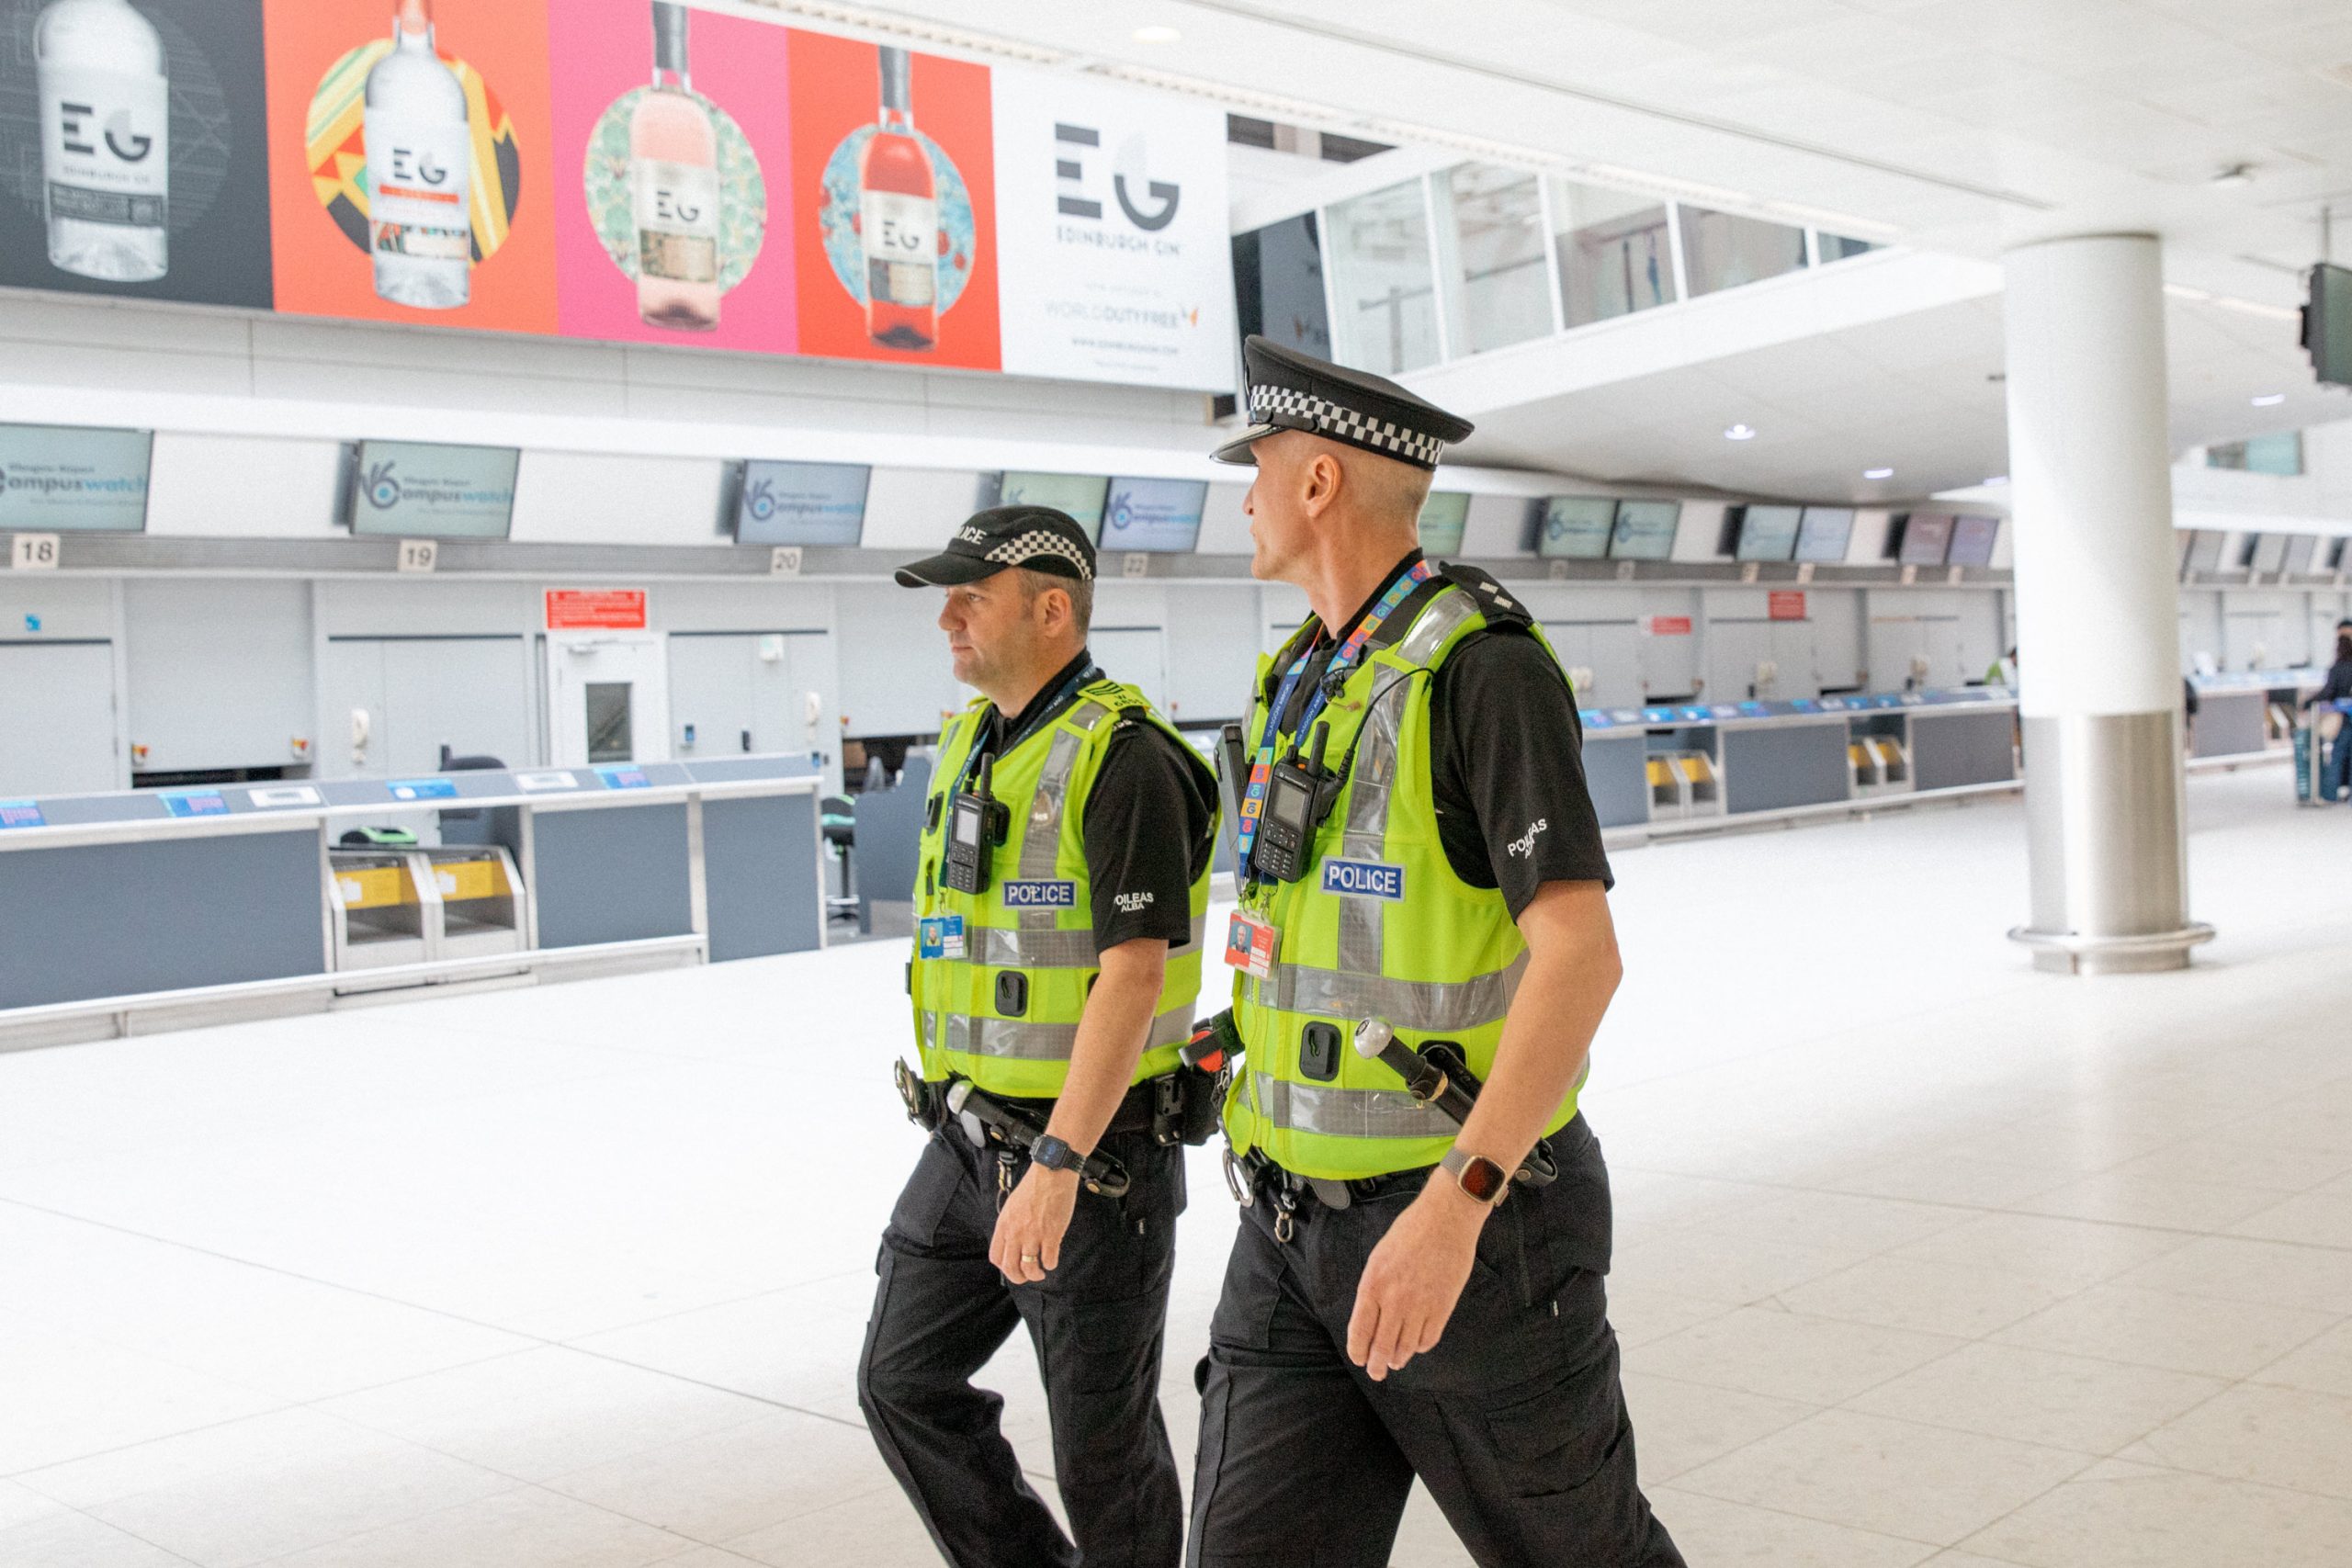 Two Police Officers walking through an airport.